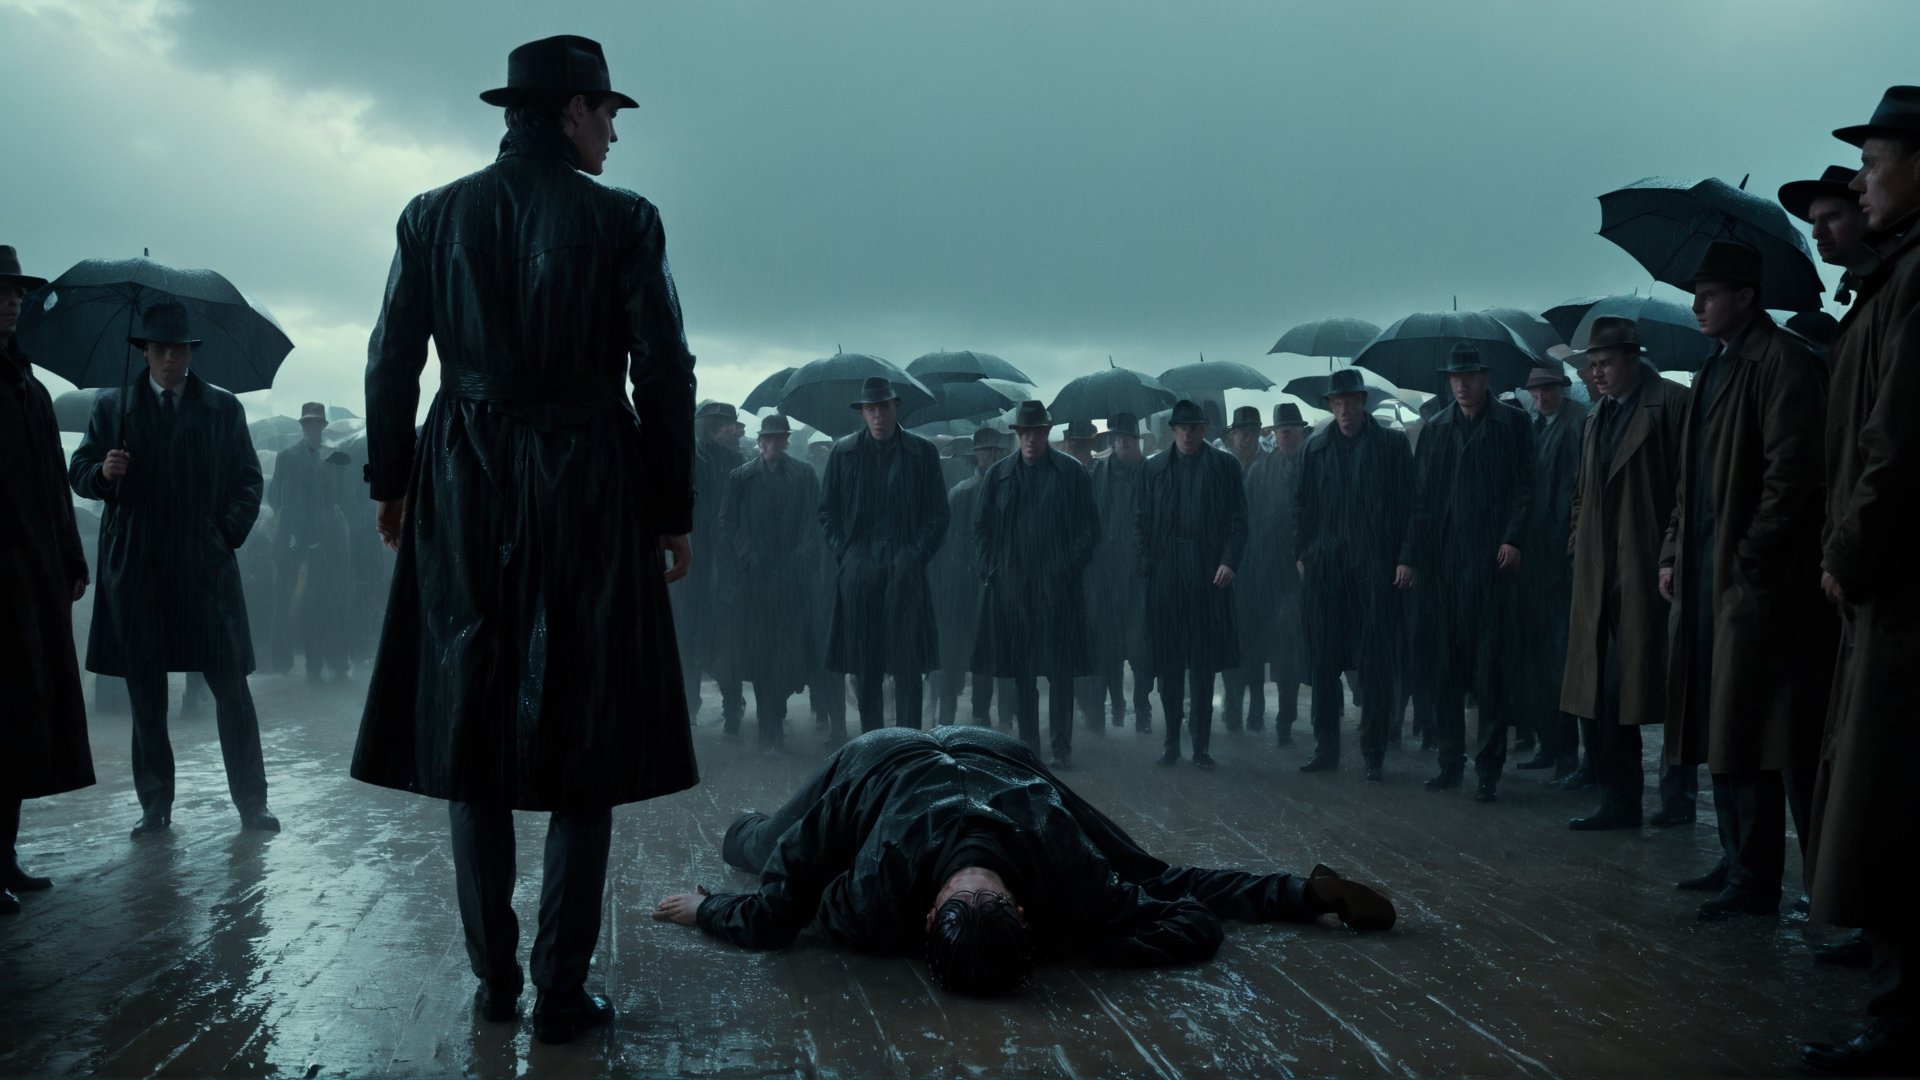 (((Cinematic of team man in black coats, Fedora hat, standing around a man like Cillian Murphy fainting on stable, wet, mire, examination, overcast sky))), dark scene, heavy rain, mid-century. Film Still, realistic, dark color, hyper details, ((center:1.5)), low_view:2, moviemaker style,ghost person